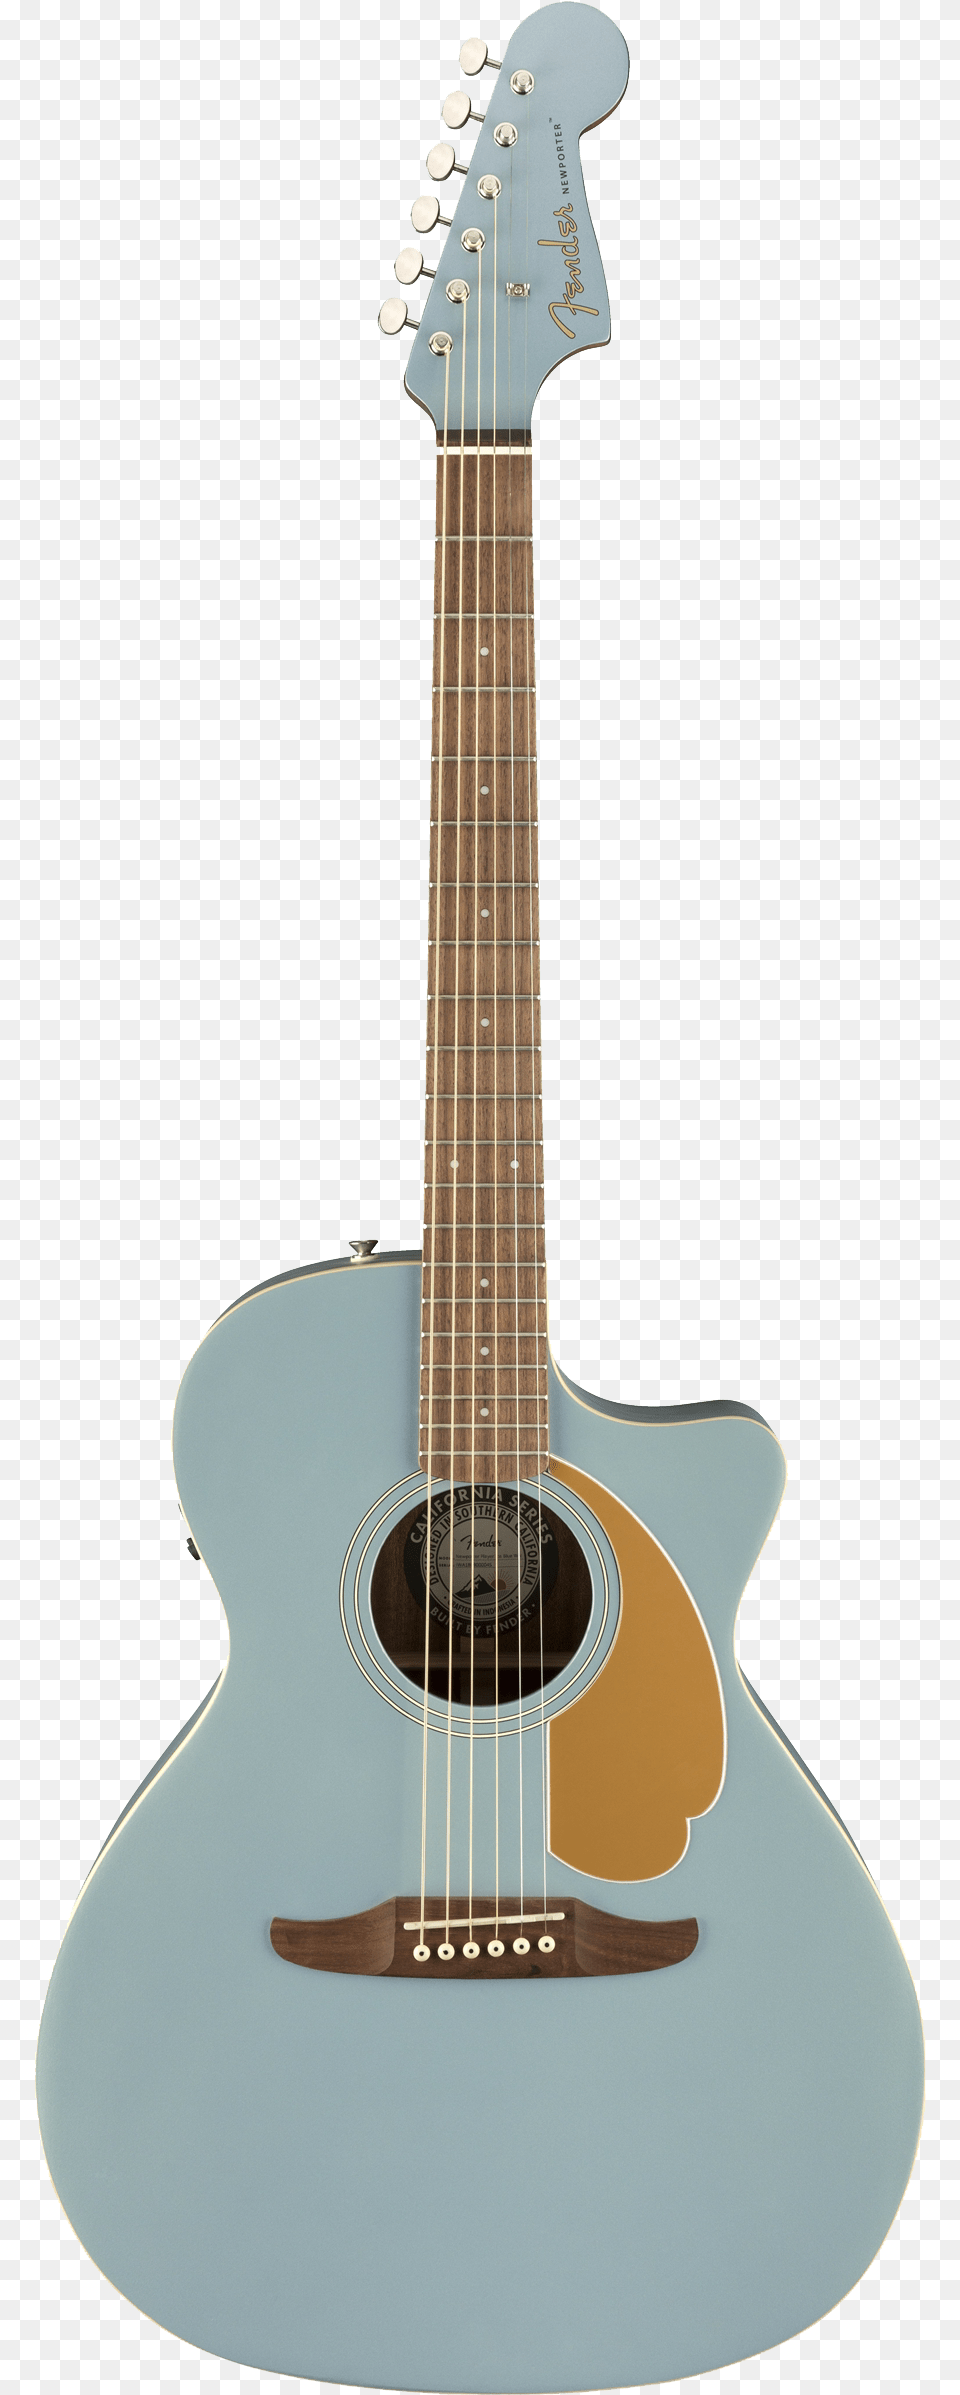 Fender Newporter Player Acoustic Electric Guitar Fender Acoustic Guitar, Musical Instrument, Bass Guitar Free Transparent Png